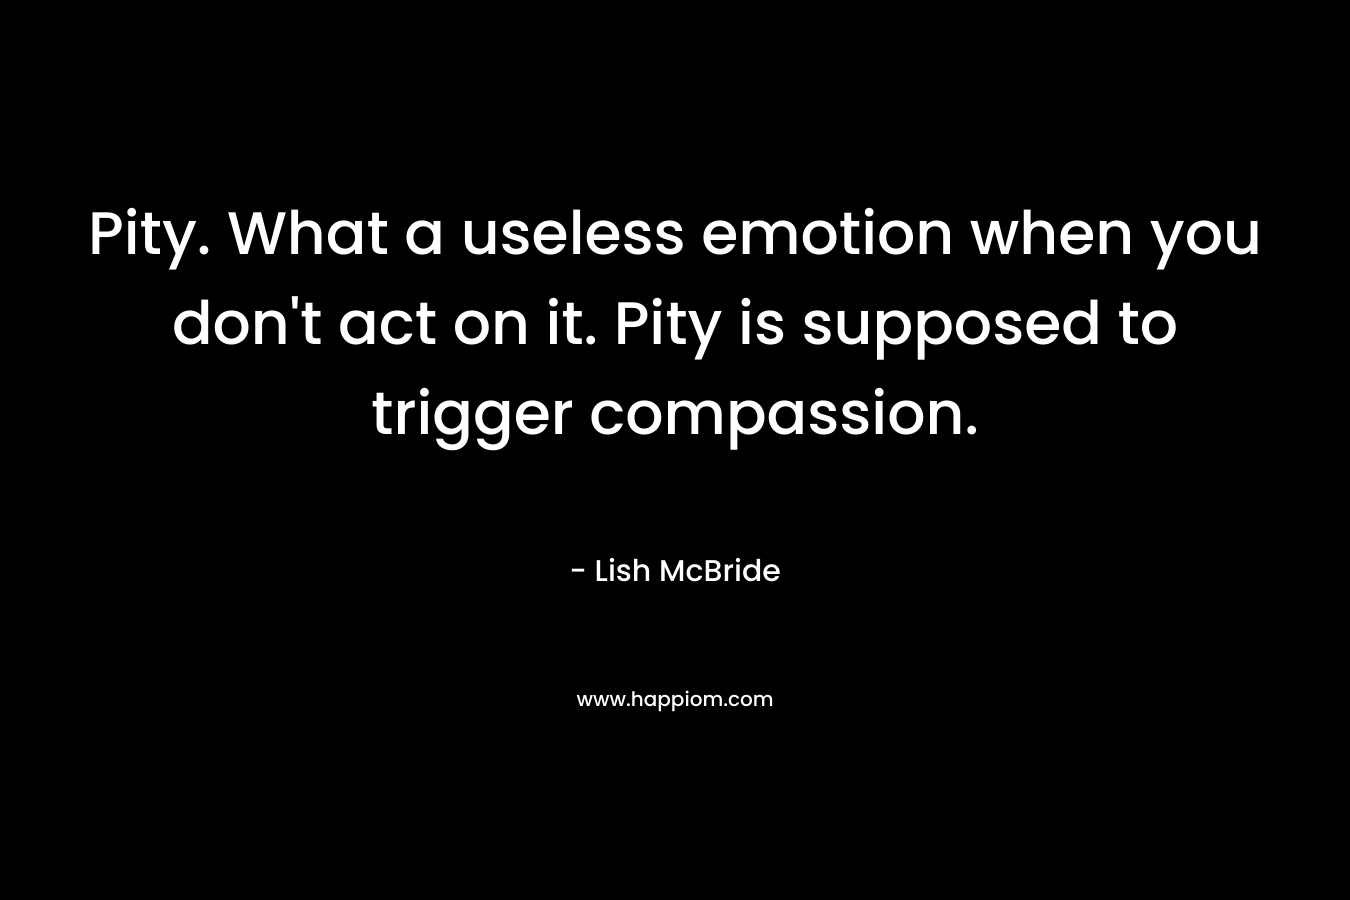 Pity. What a useless emotion when you don’t act on it. Pity is supposed to trigger compassion. – Lish McBride